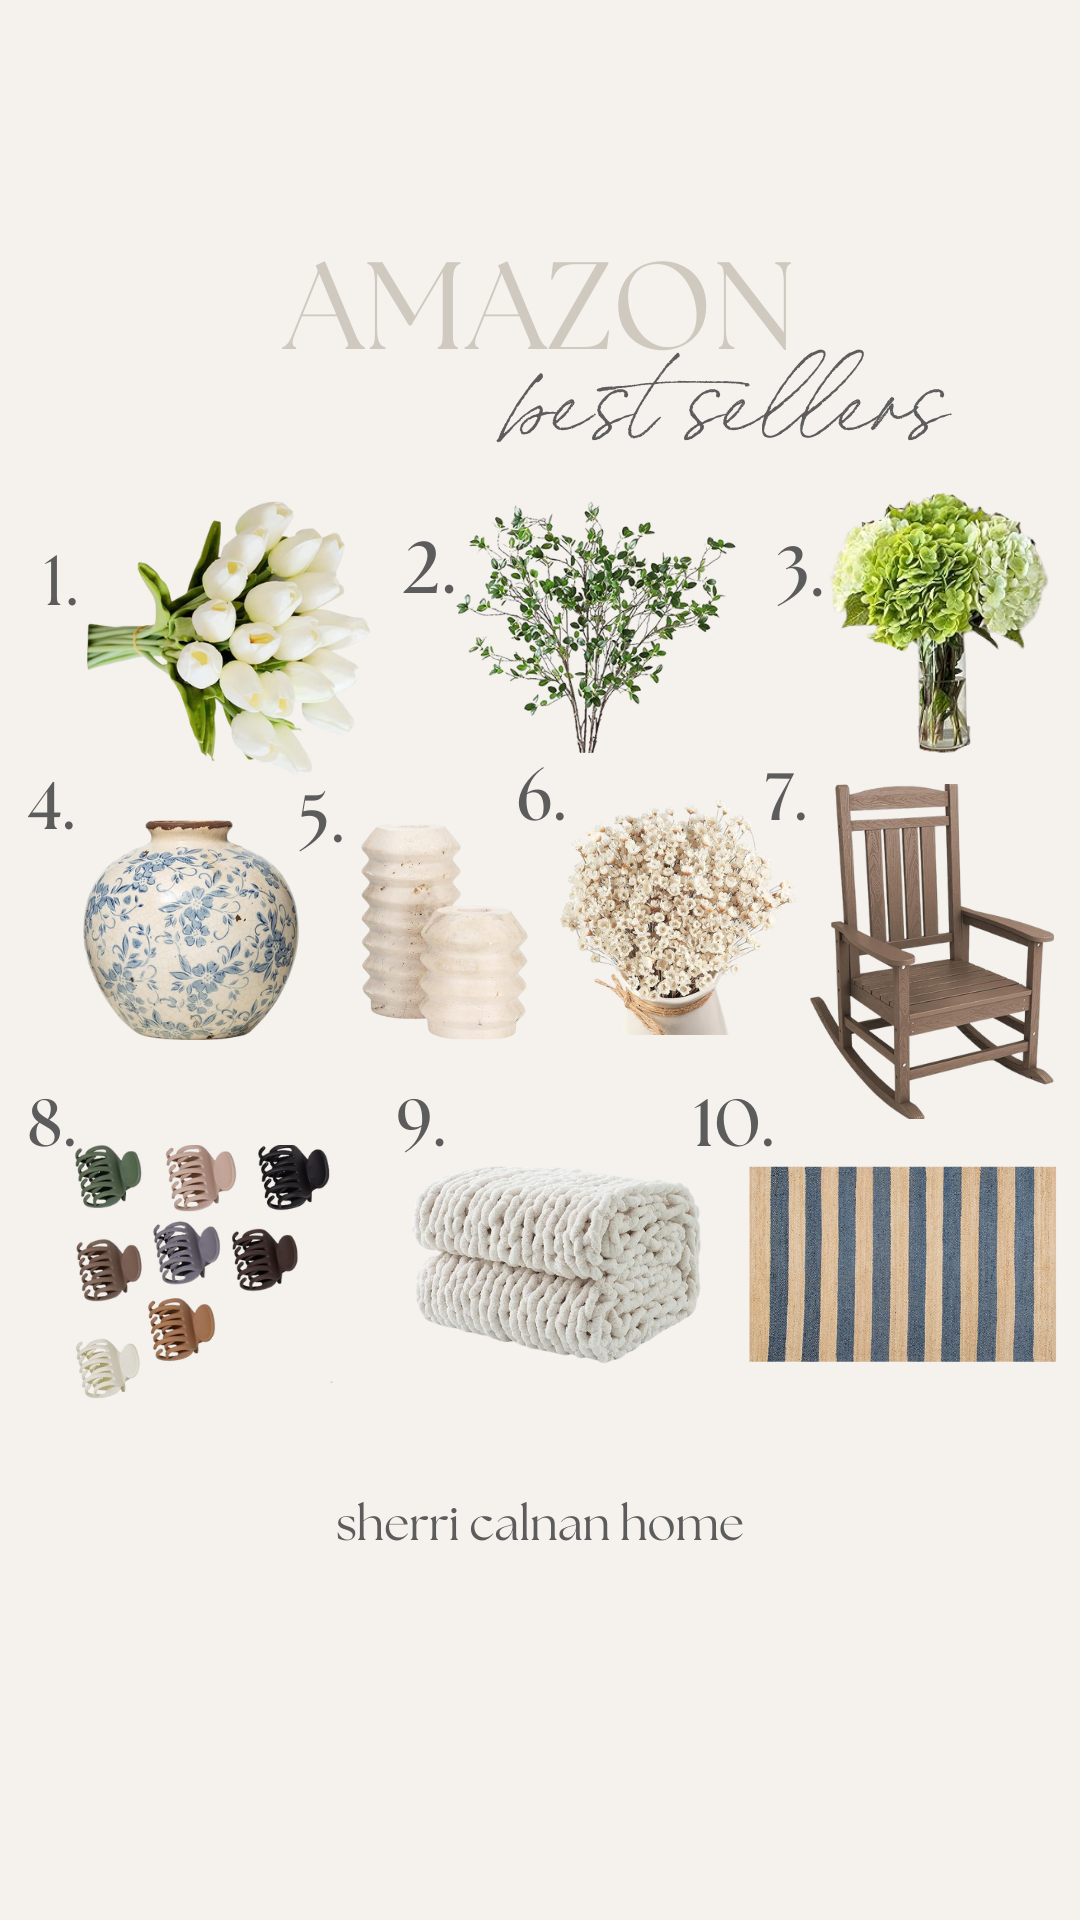 March Most Loved Home Items, Home Favorites, Home Finds, March favorites, March finds, My favorite finds, Home decor, Home inspo, Coastal Home, March Most Loved, March home items, Favorite home finds, Home decor inpso, Amazon most loved items, March amazon finds, Amazon home decor, amazon how to style, amazon favorite home items 